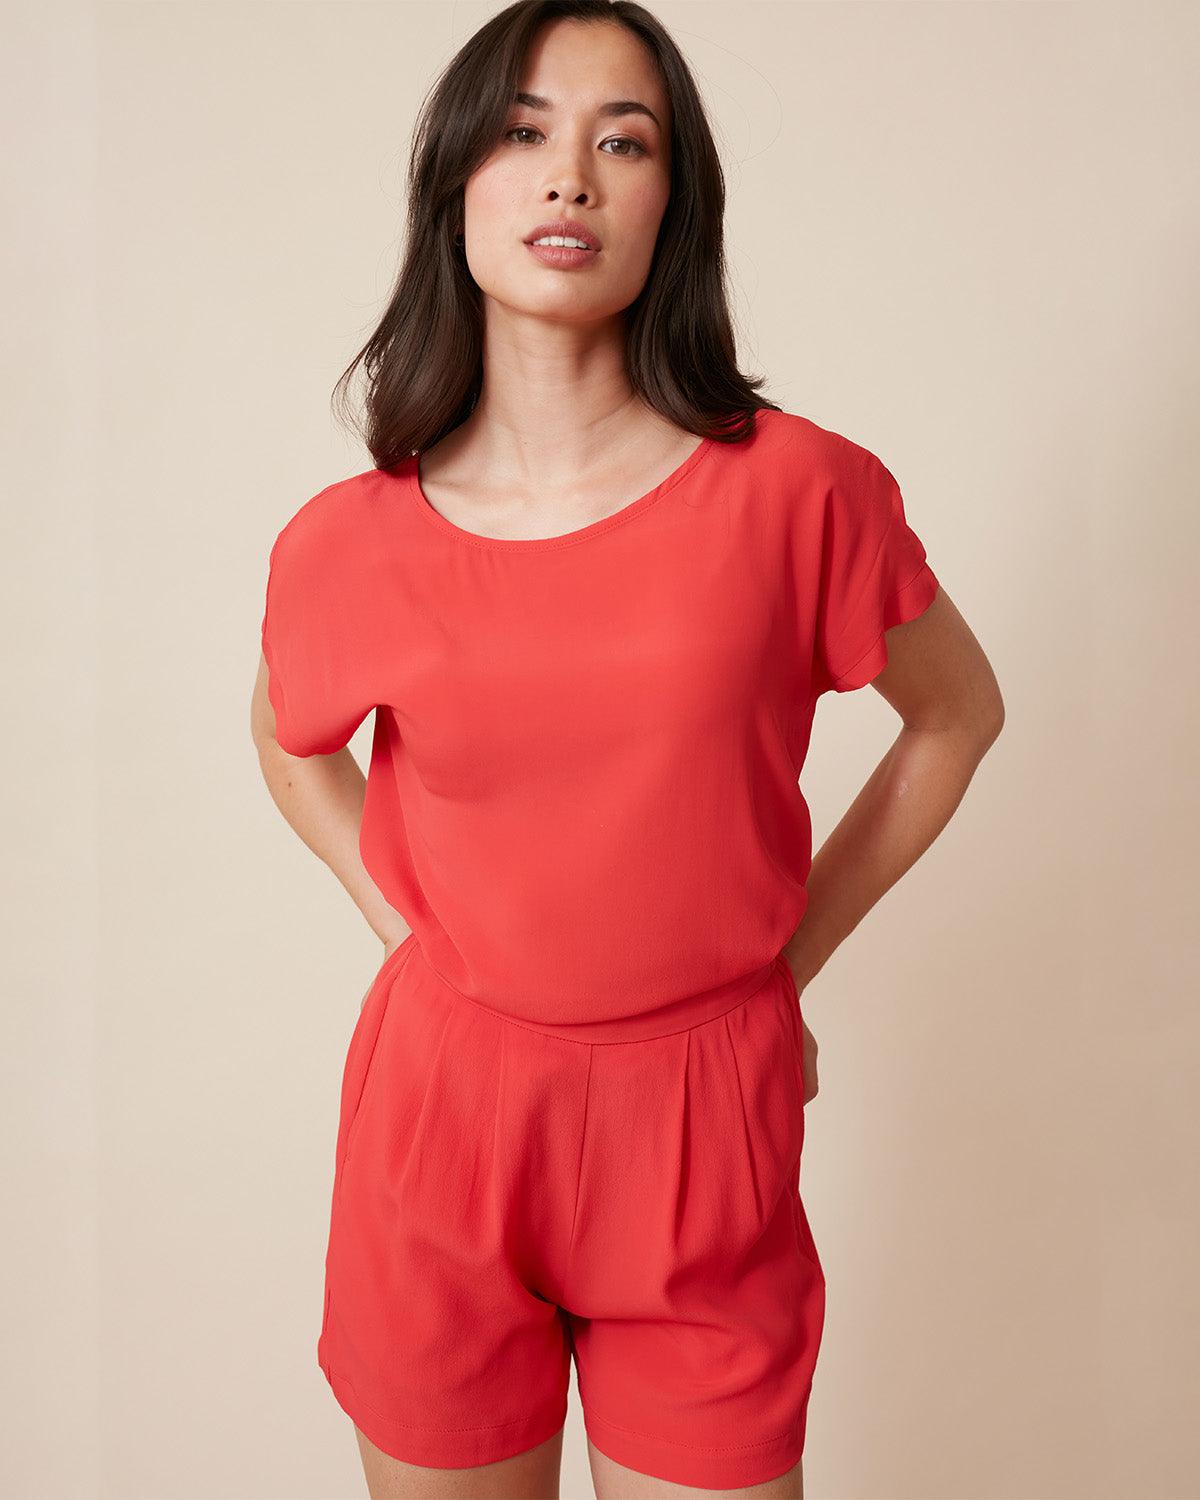 "#color_CHILI RED|Elyse is 5'9", wearing a size XS